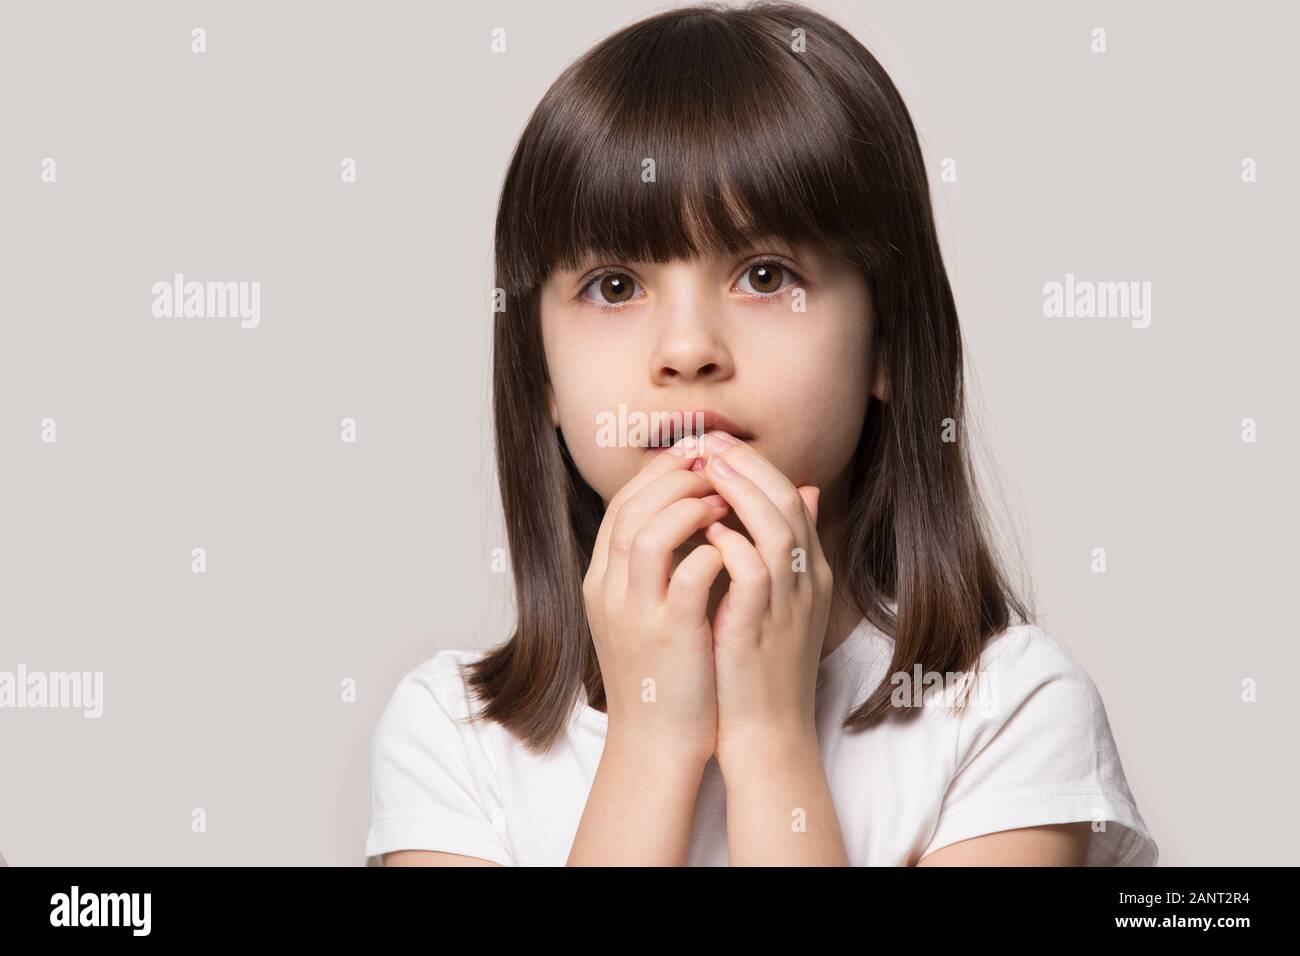 Worried about left alone little girl holding hands near mouth. Stock Photo